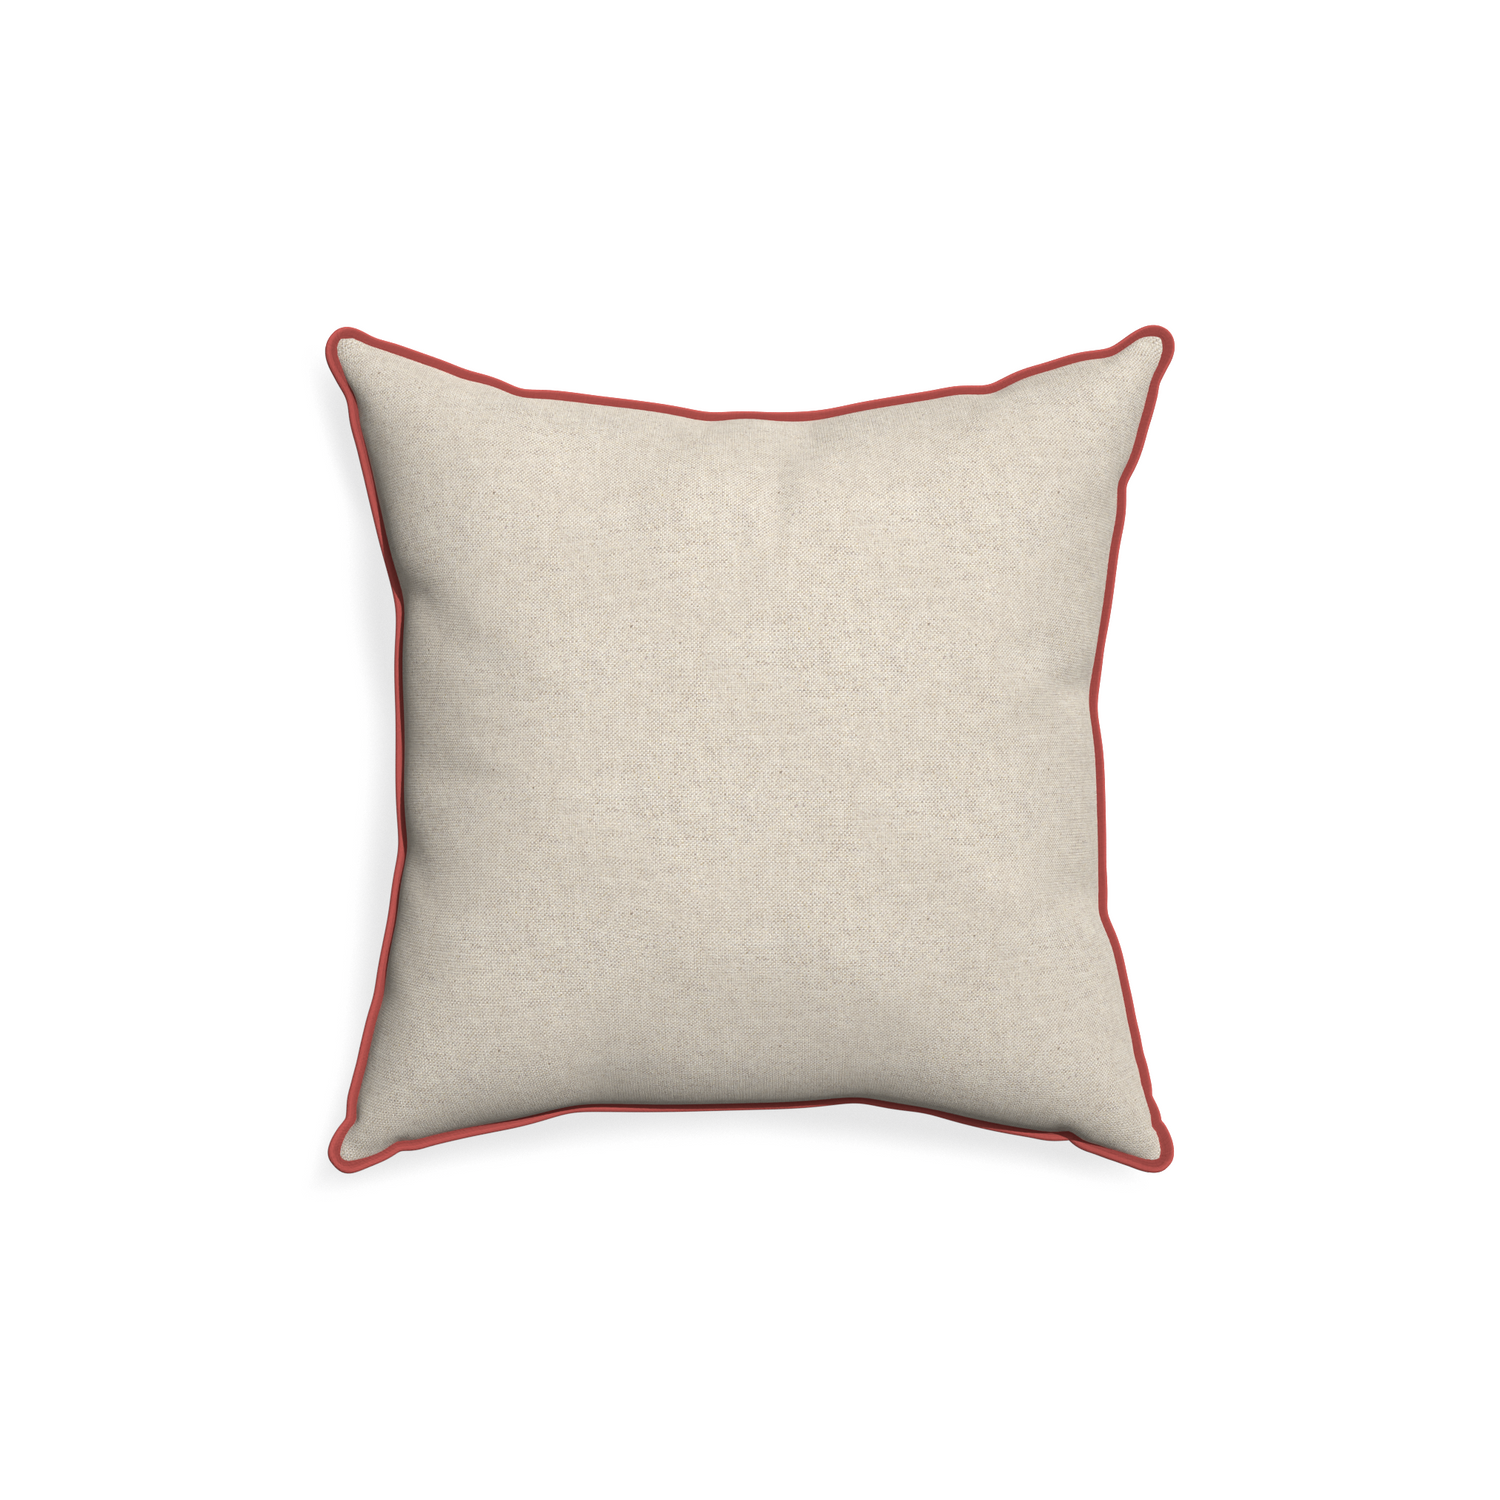 18-square oat custom light brownpillow with c piping on white background